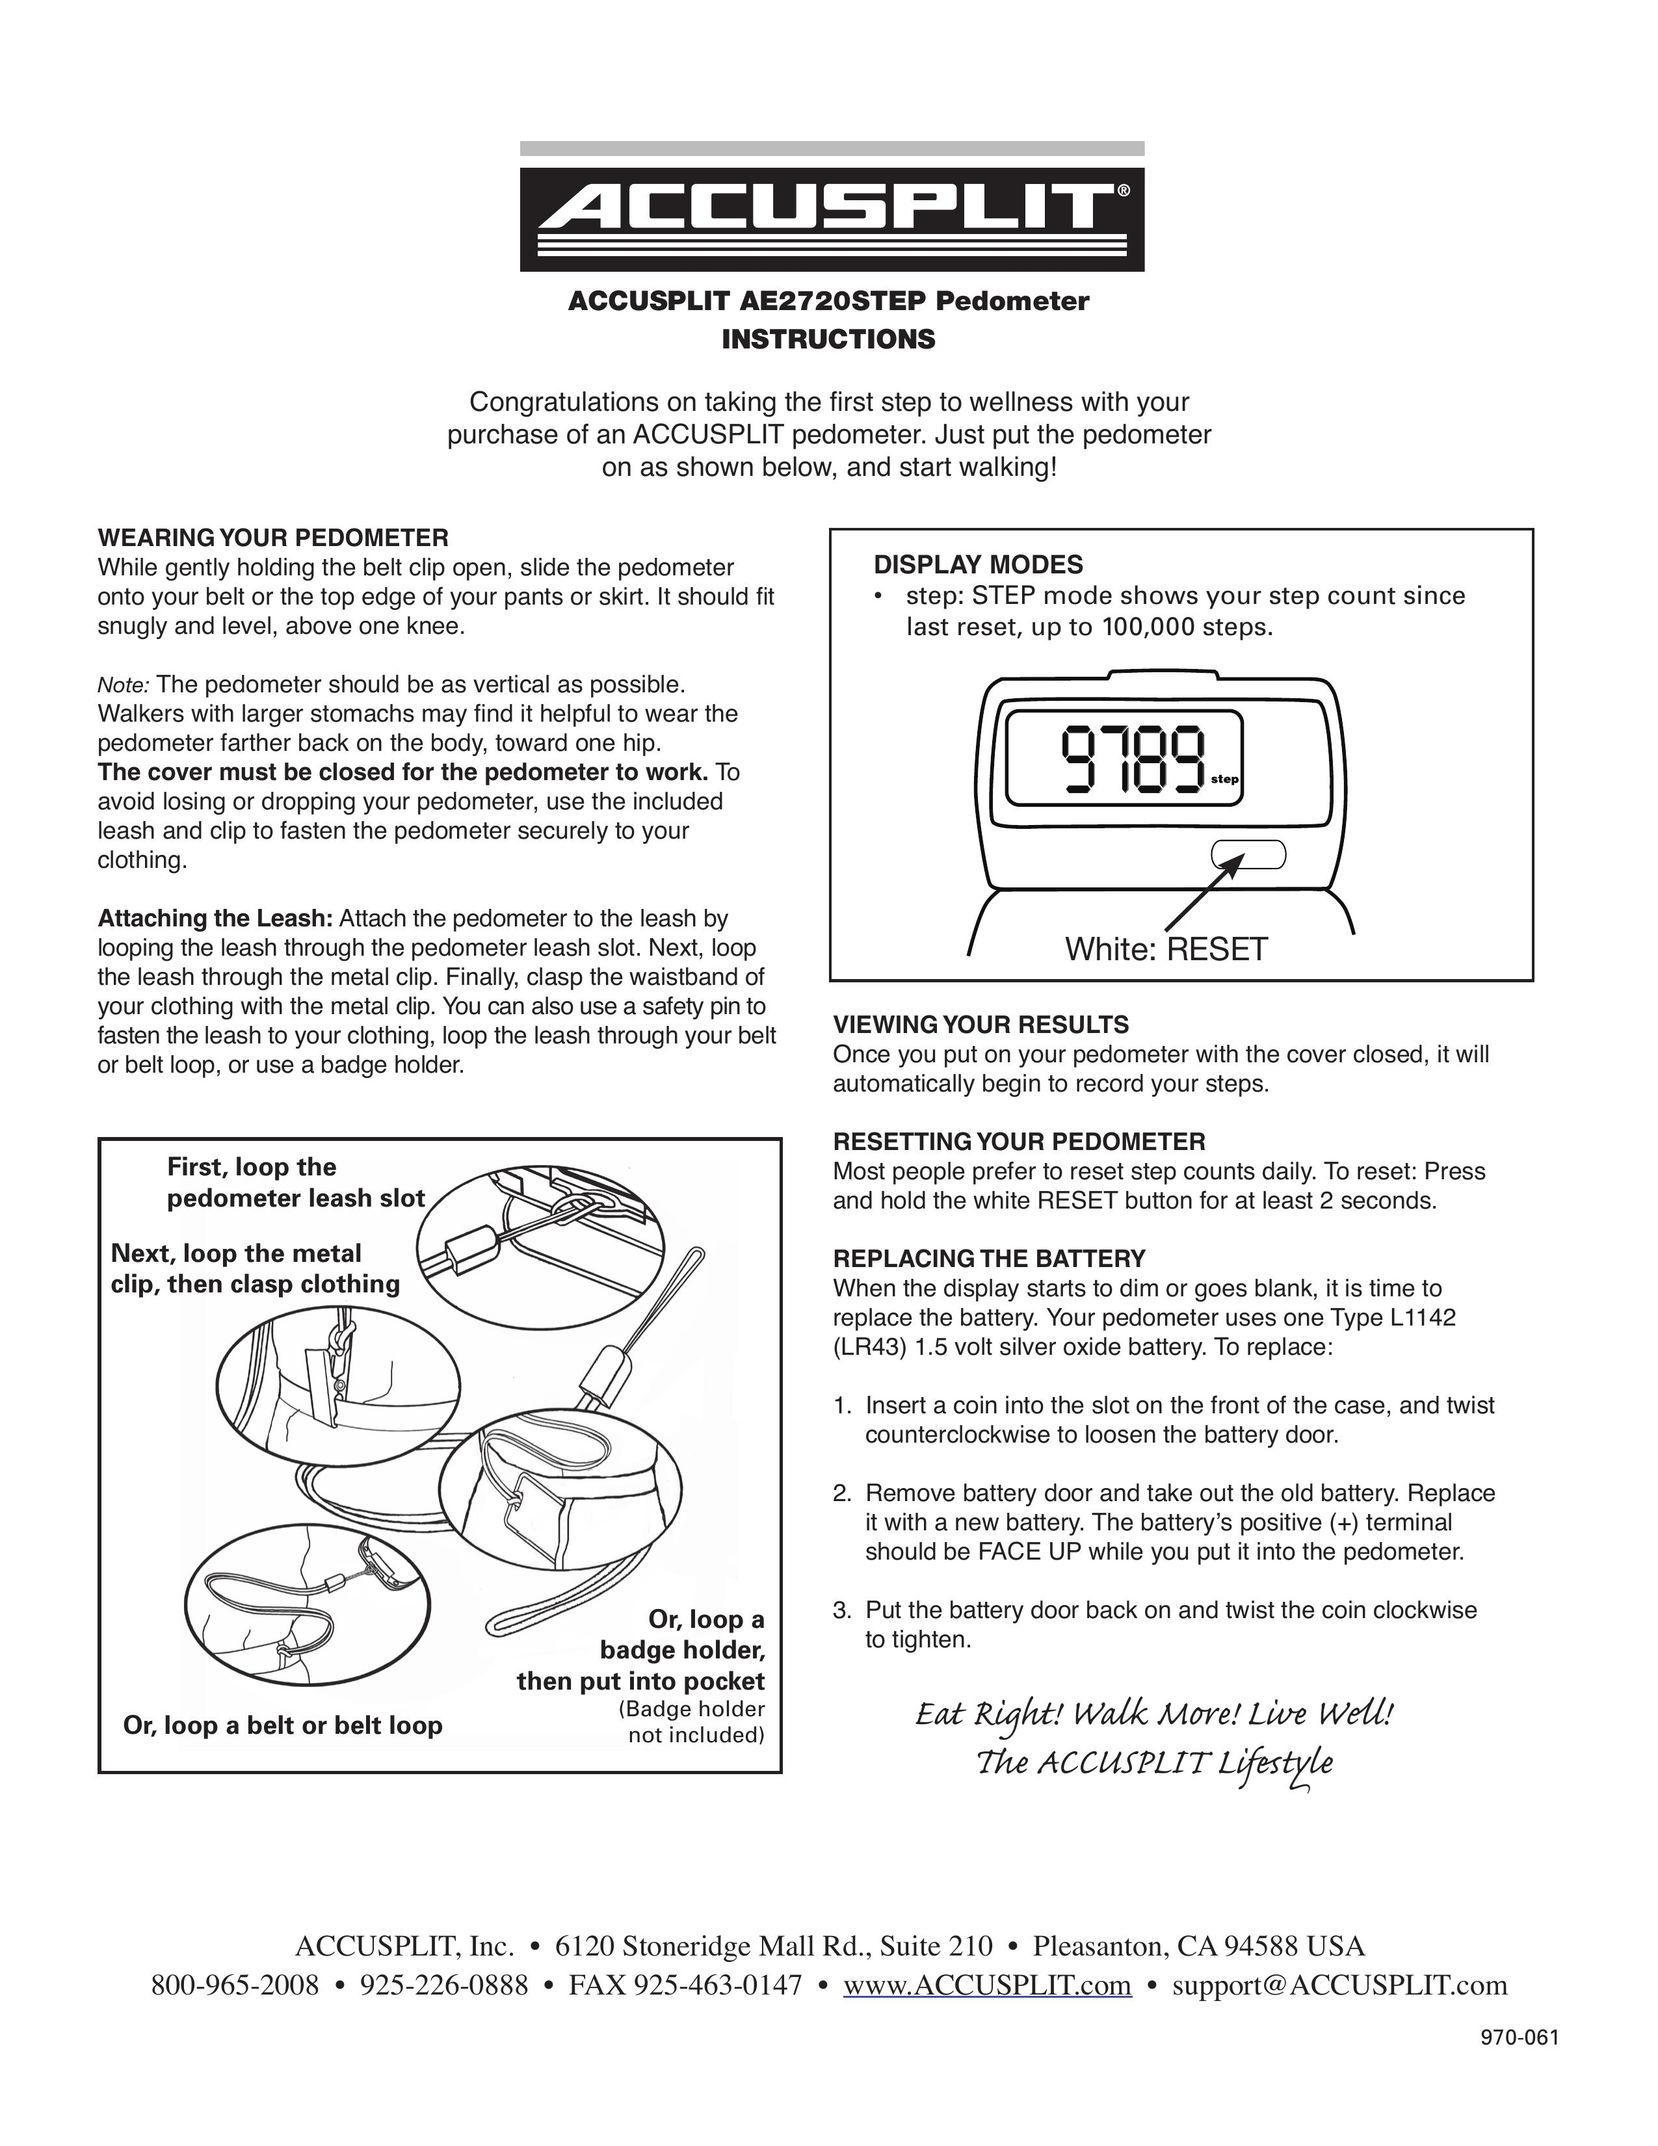 Accusplit AE2720STEP Fitness Electronics User Manual